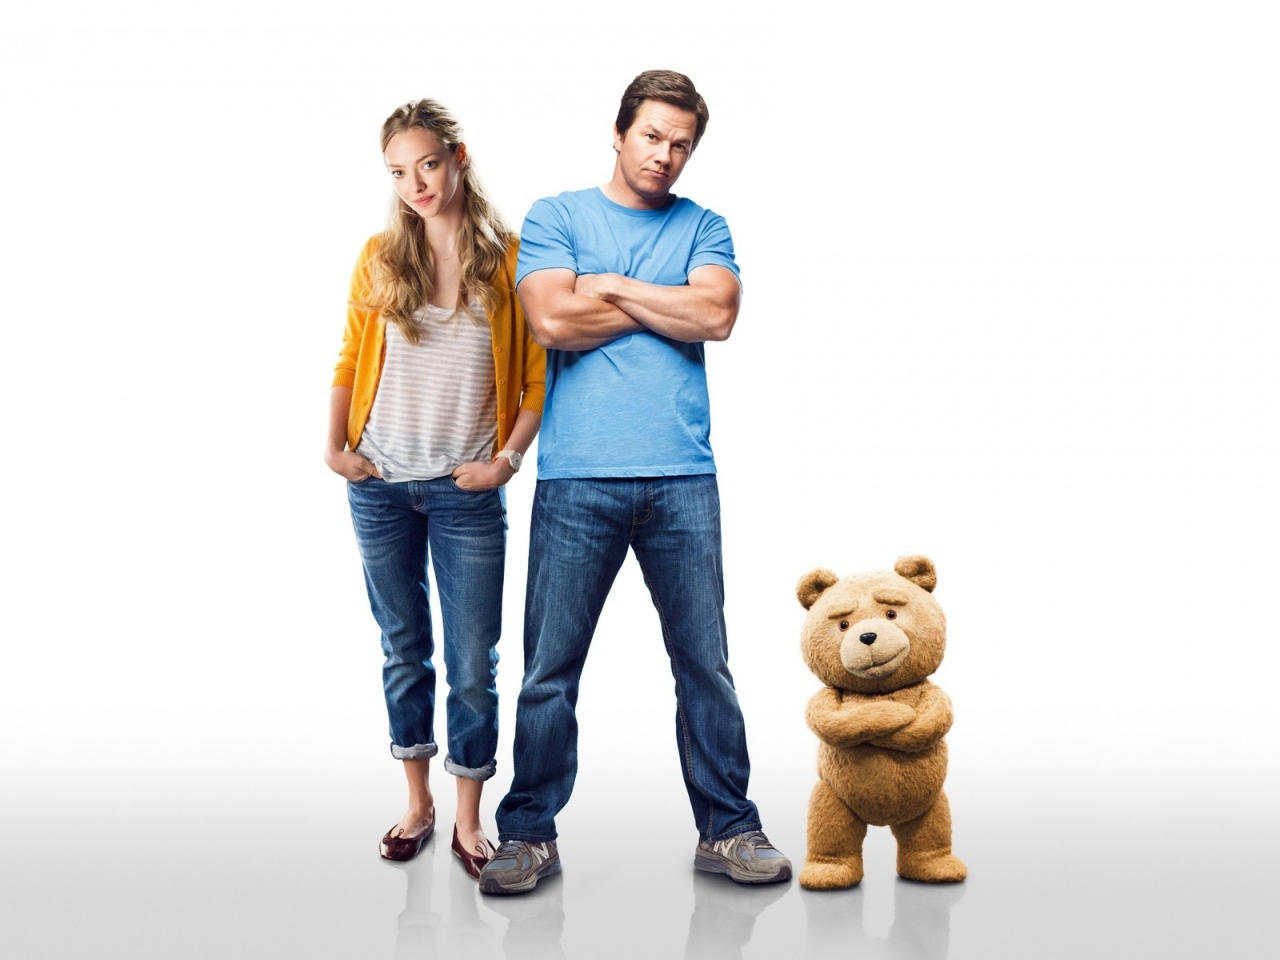 Ted 2 for 1280 x 960 resolution